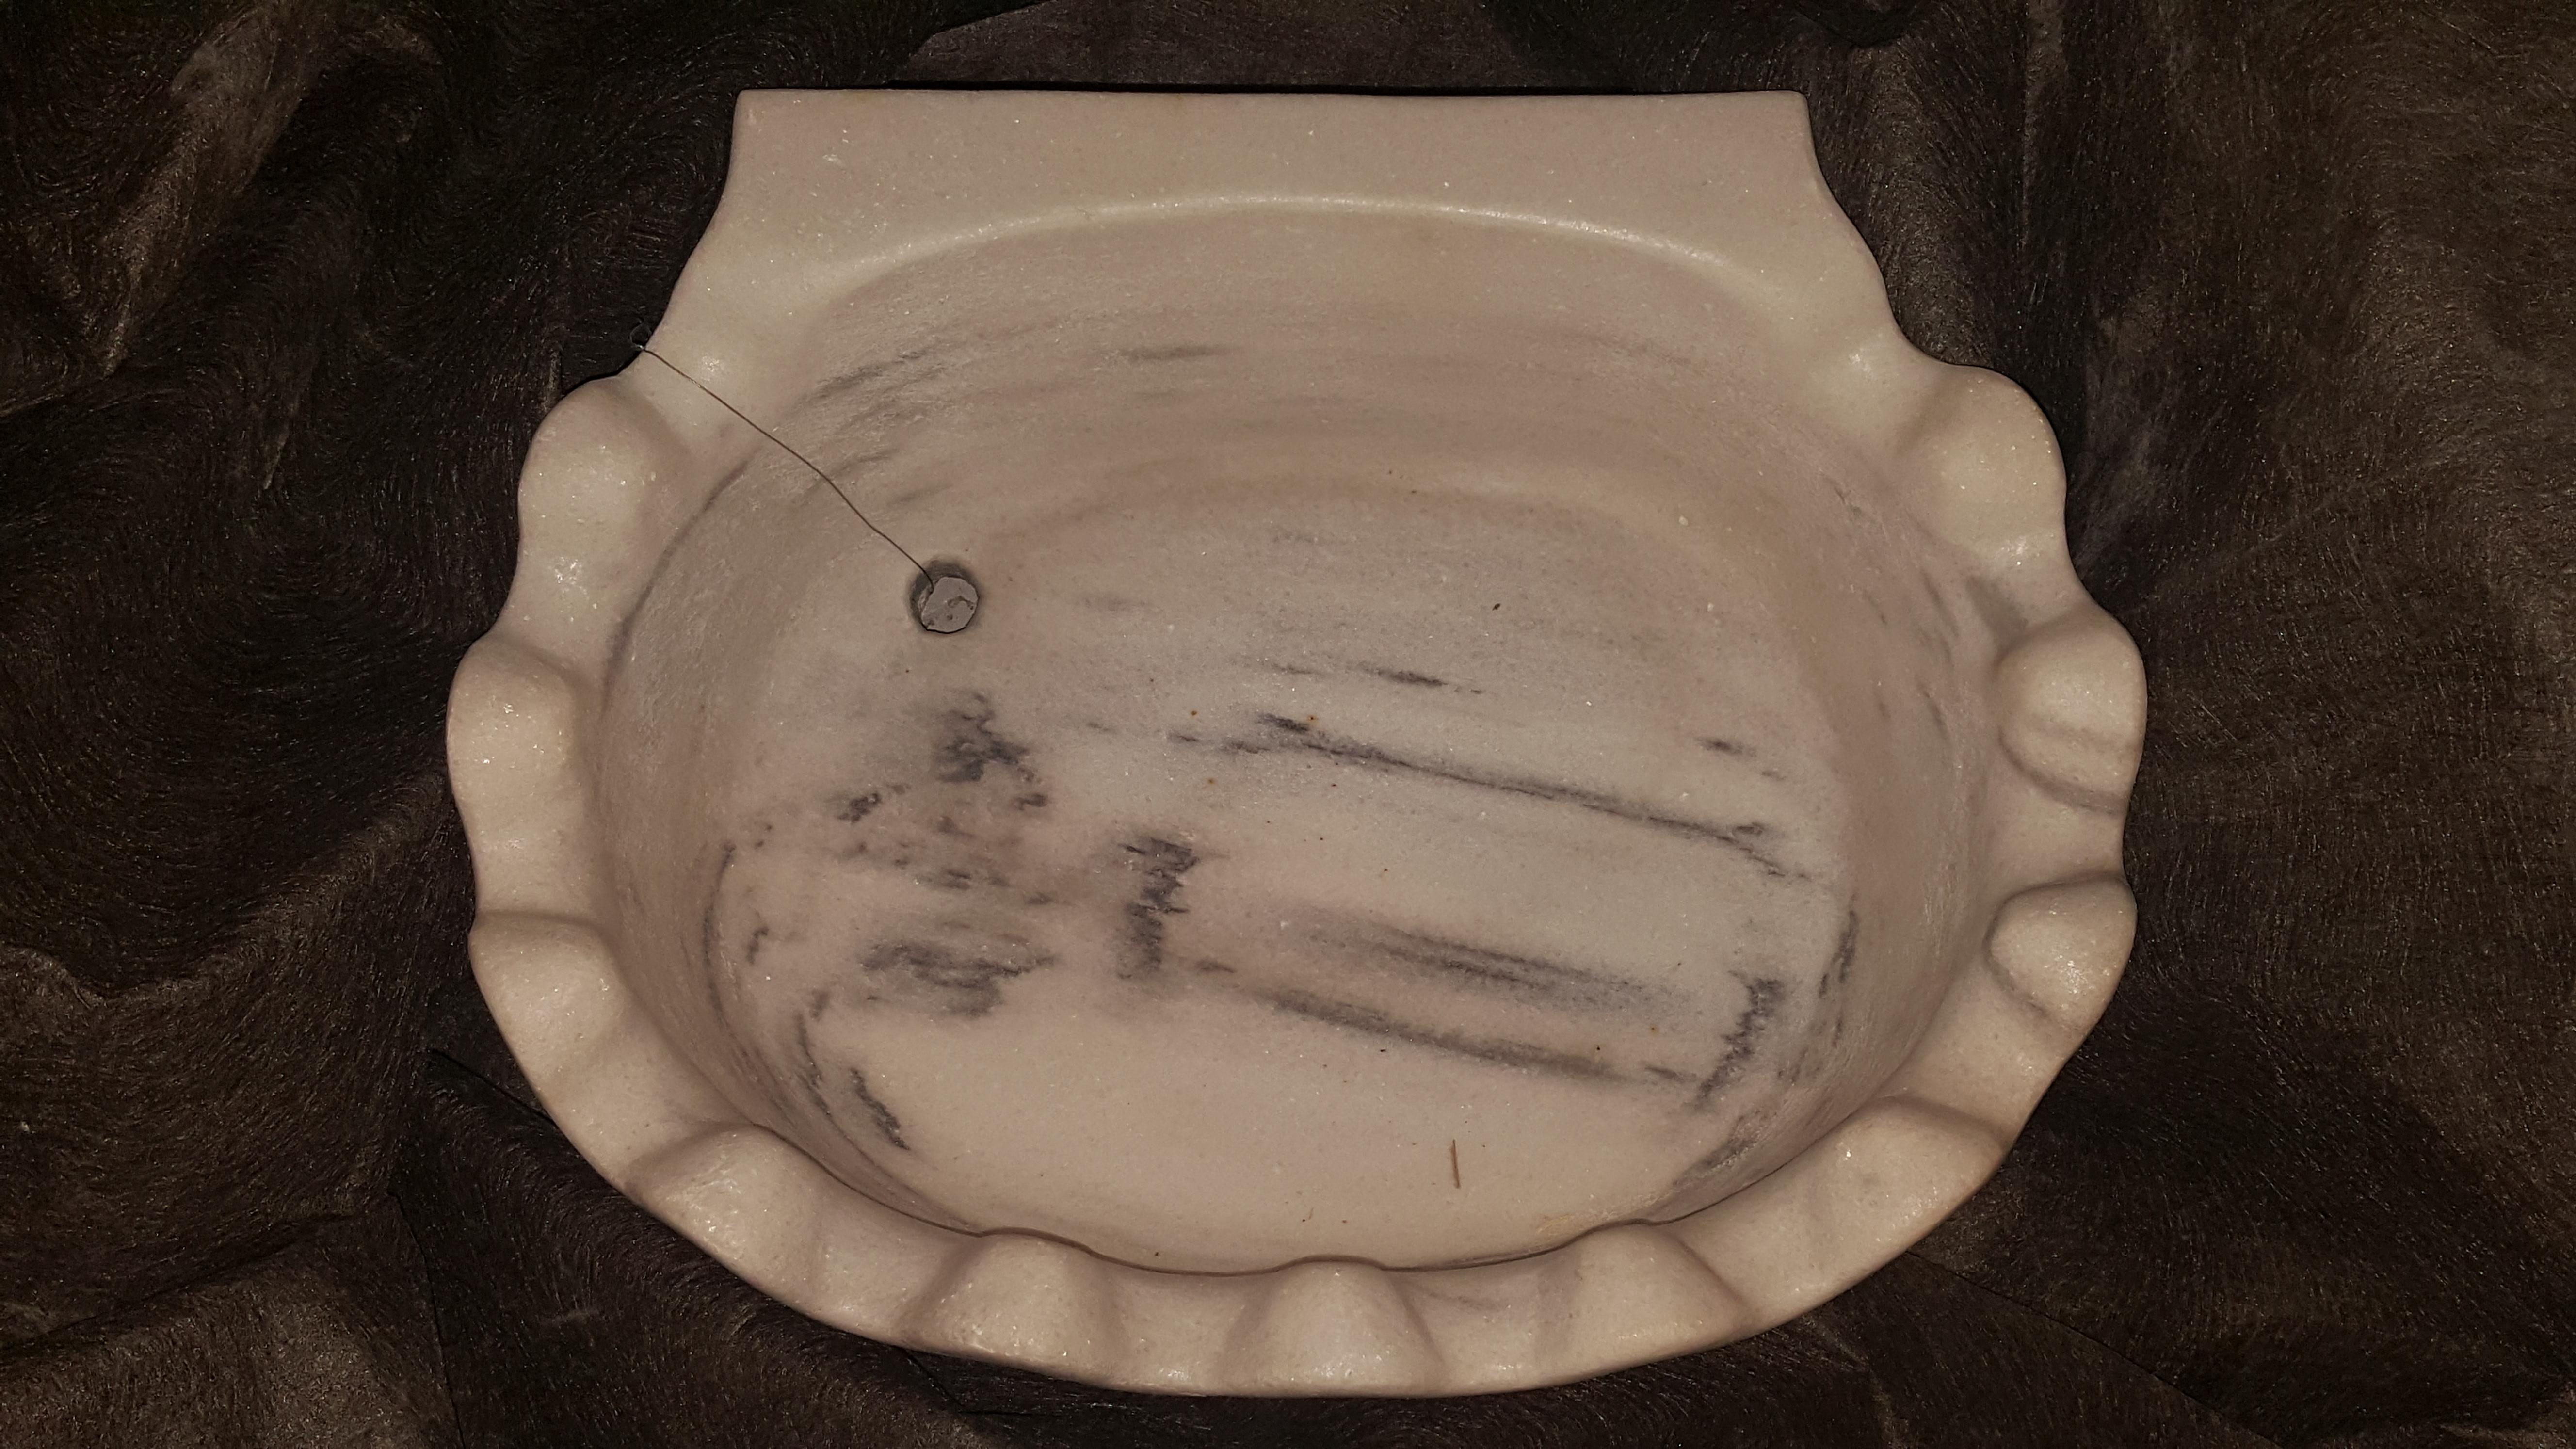 Antique marble sink with a scalloped sea shell design.